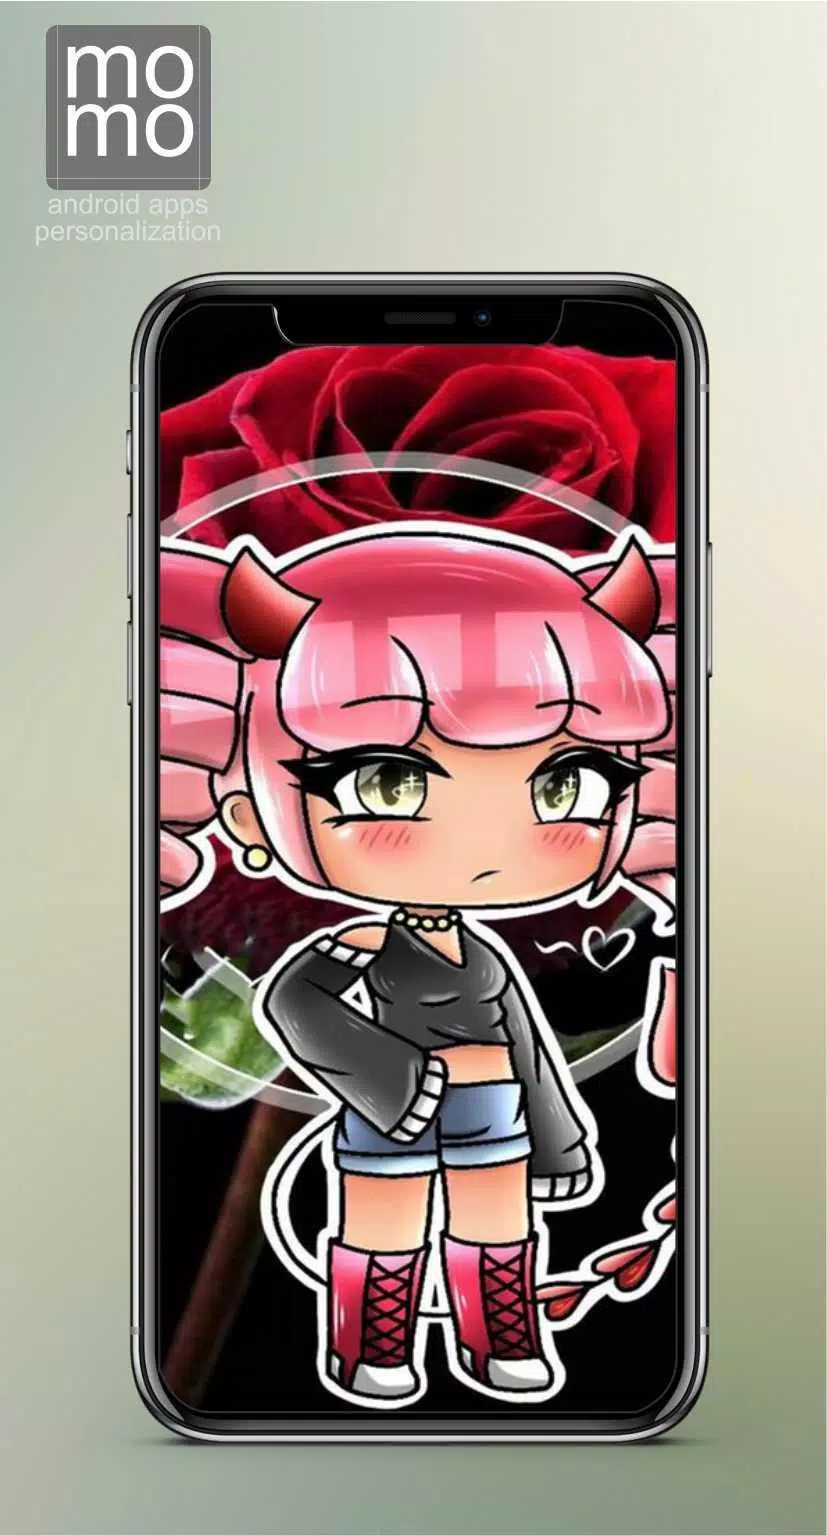 Chibi Wallpaper Gacha Life HD New APK for Android Download